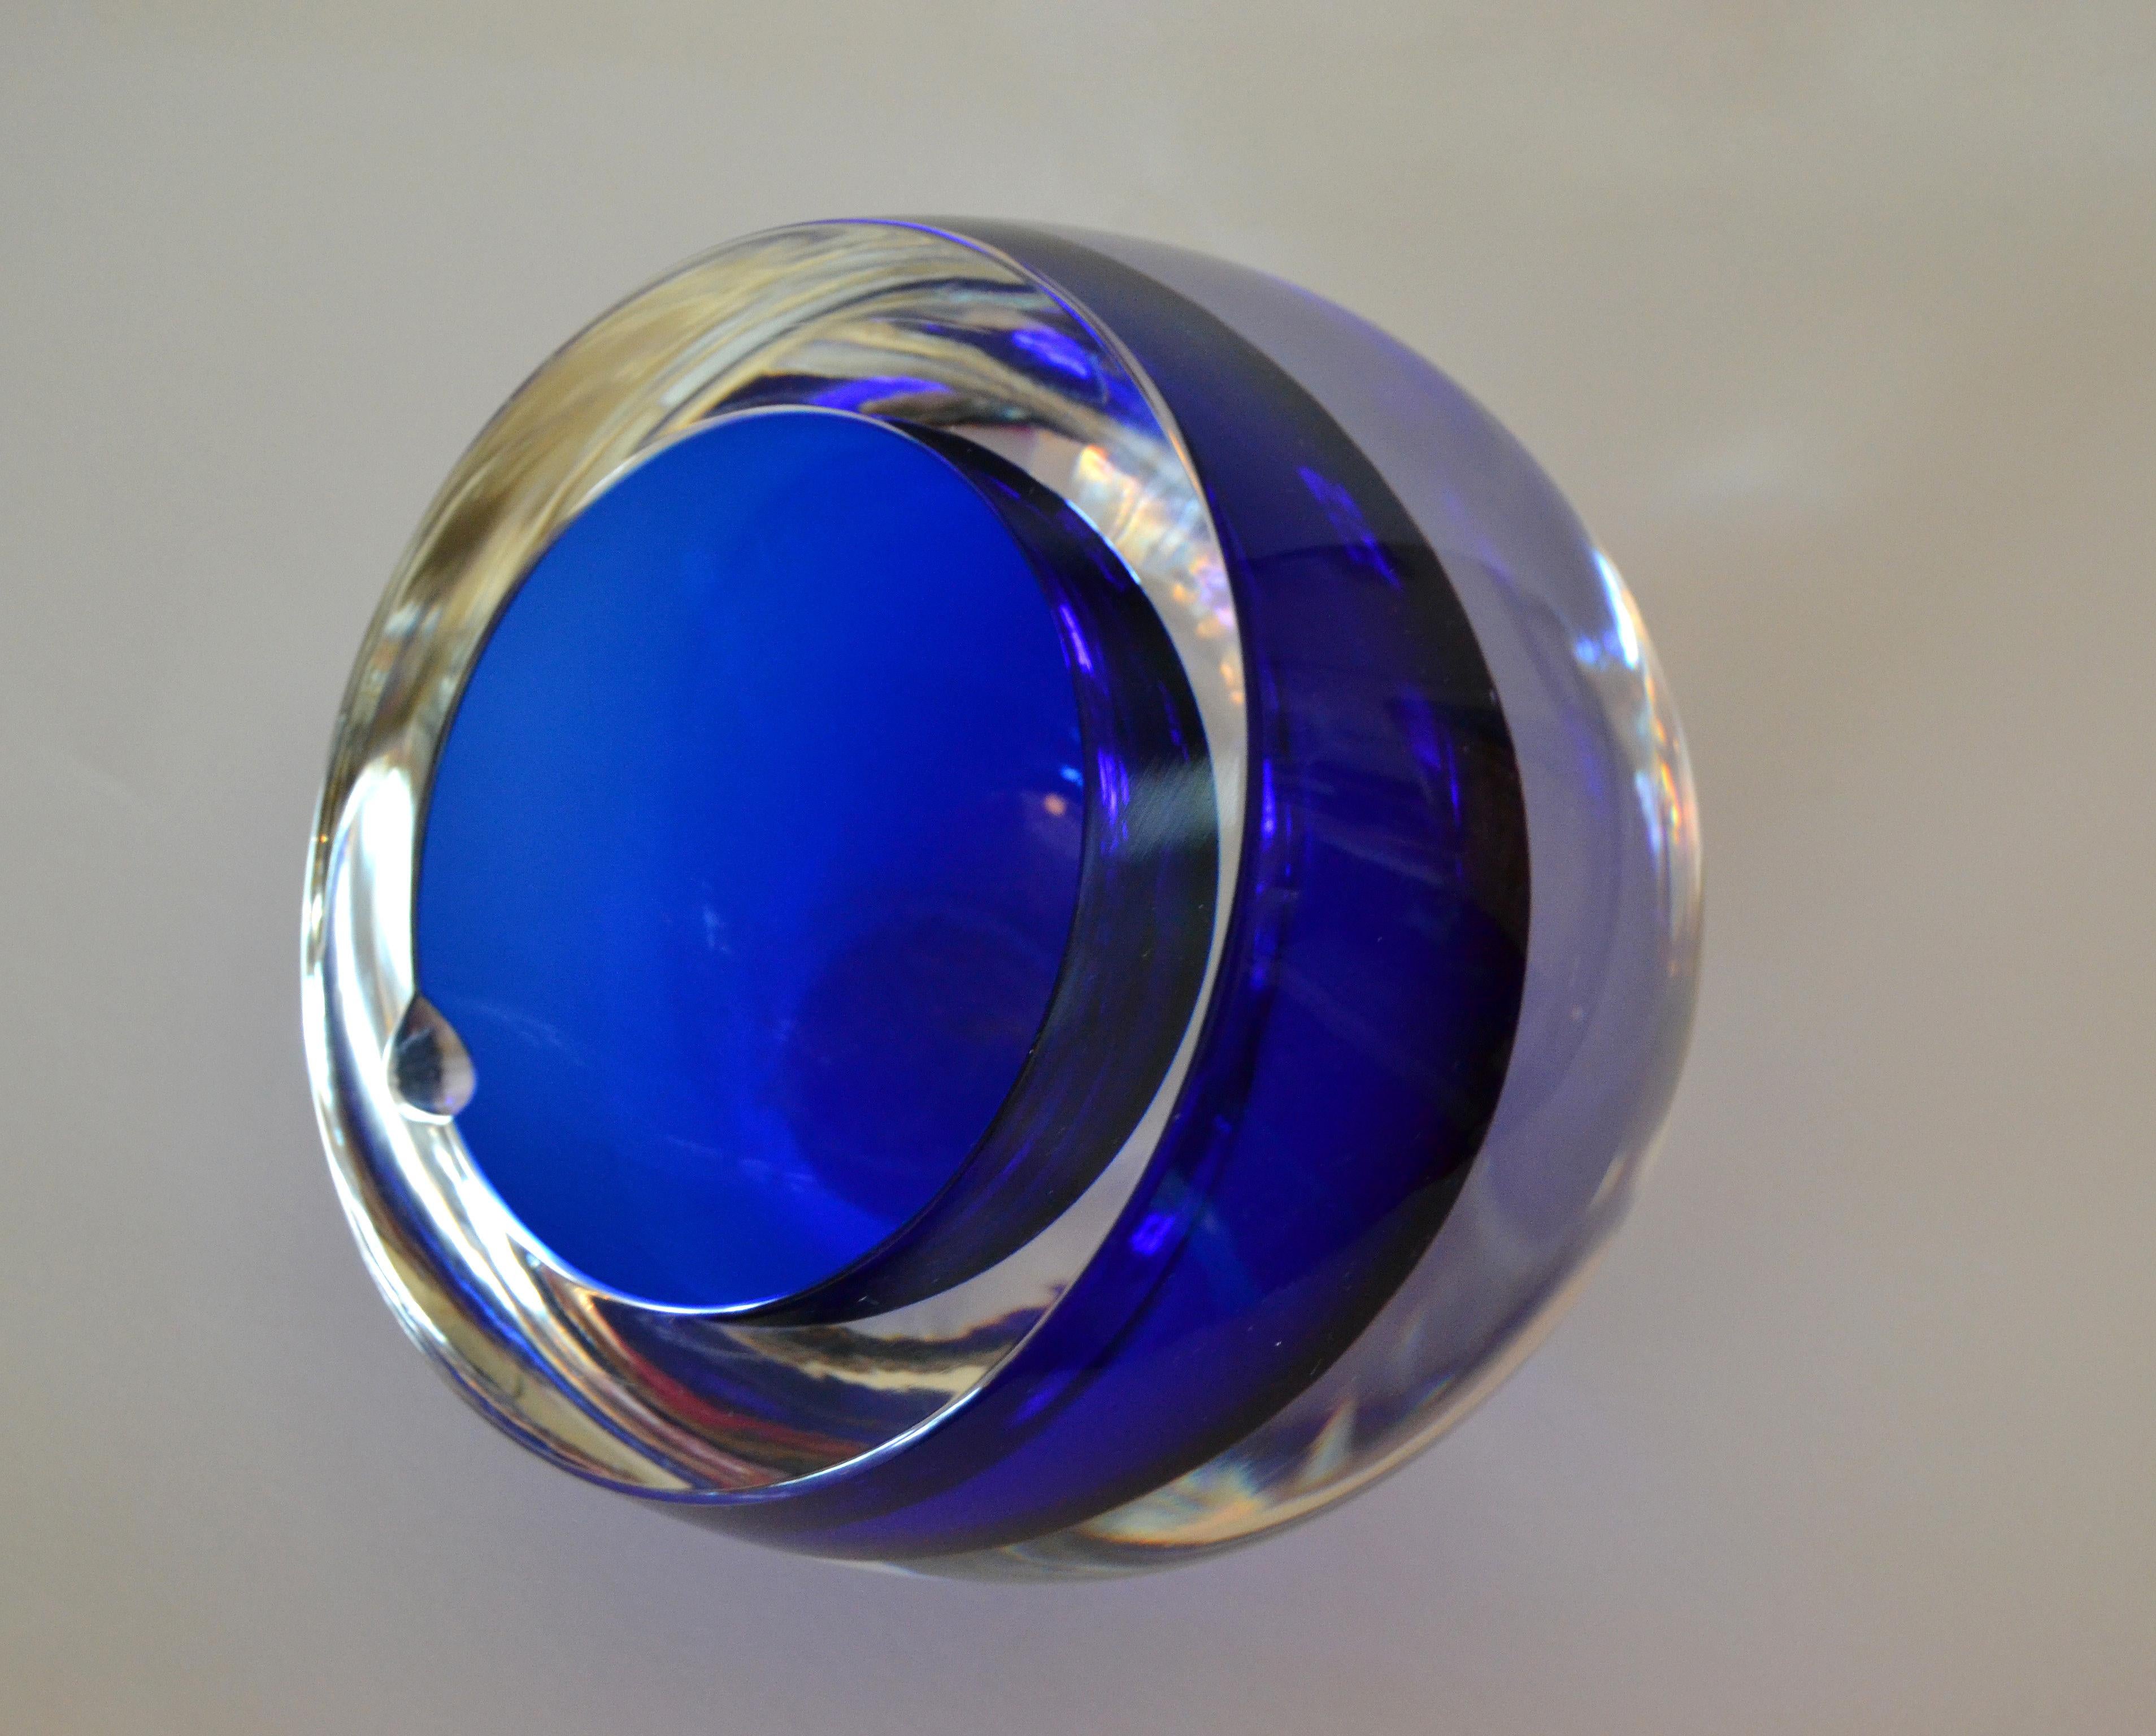 Mid-Century Modern Signed Gino Cenedese Round Heavy Murano Glass Blue and Clear Ashtray Italy 1960s